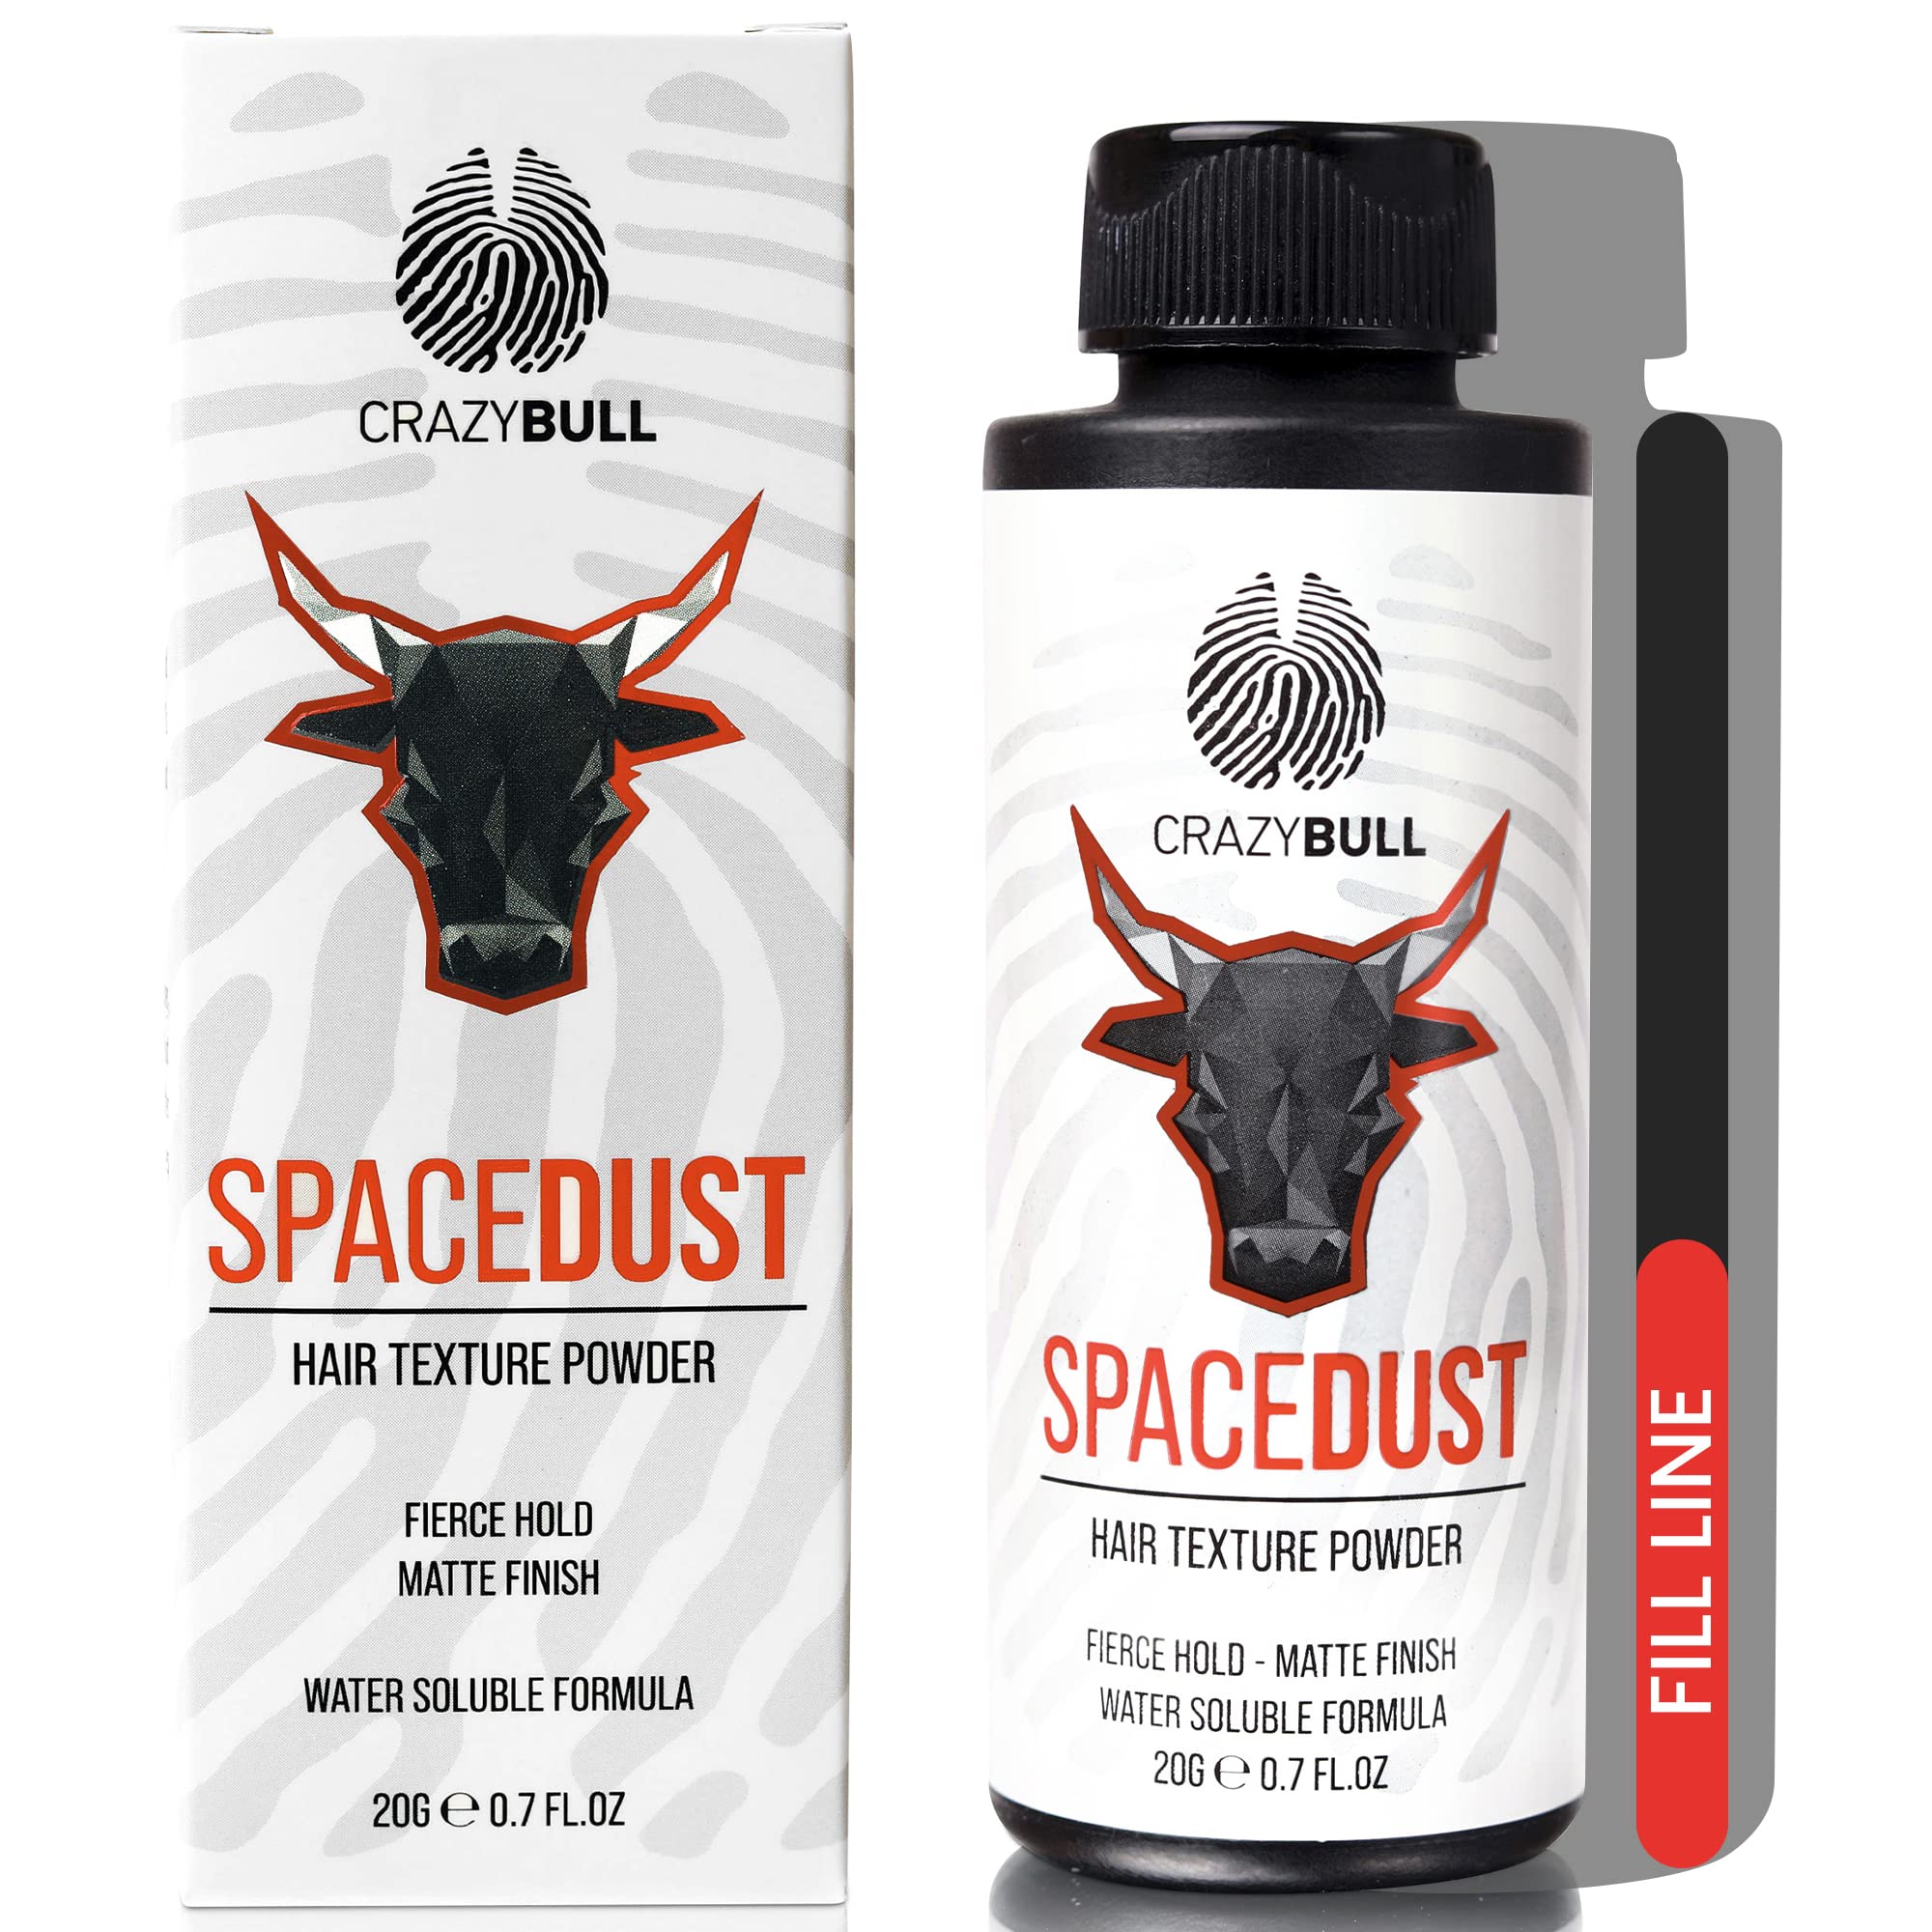 Crazy Bull Hair Powder Space Dust - Volumizing, Texturizing Hair Styling  Powder for Men - Styler for a Natural Matte Look - Flexible, Strong Hold &  No Residue - Cruelty-Free & Vegan, 20g /  oz